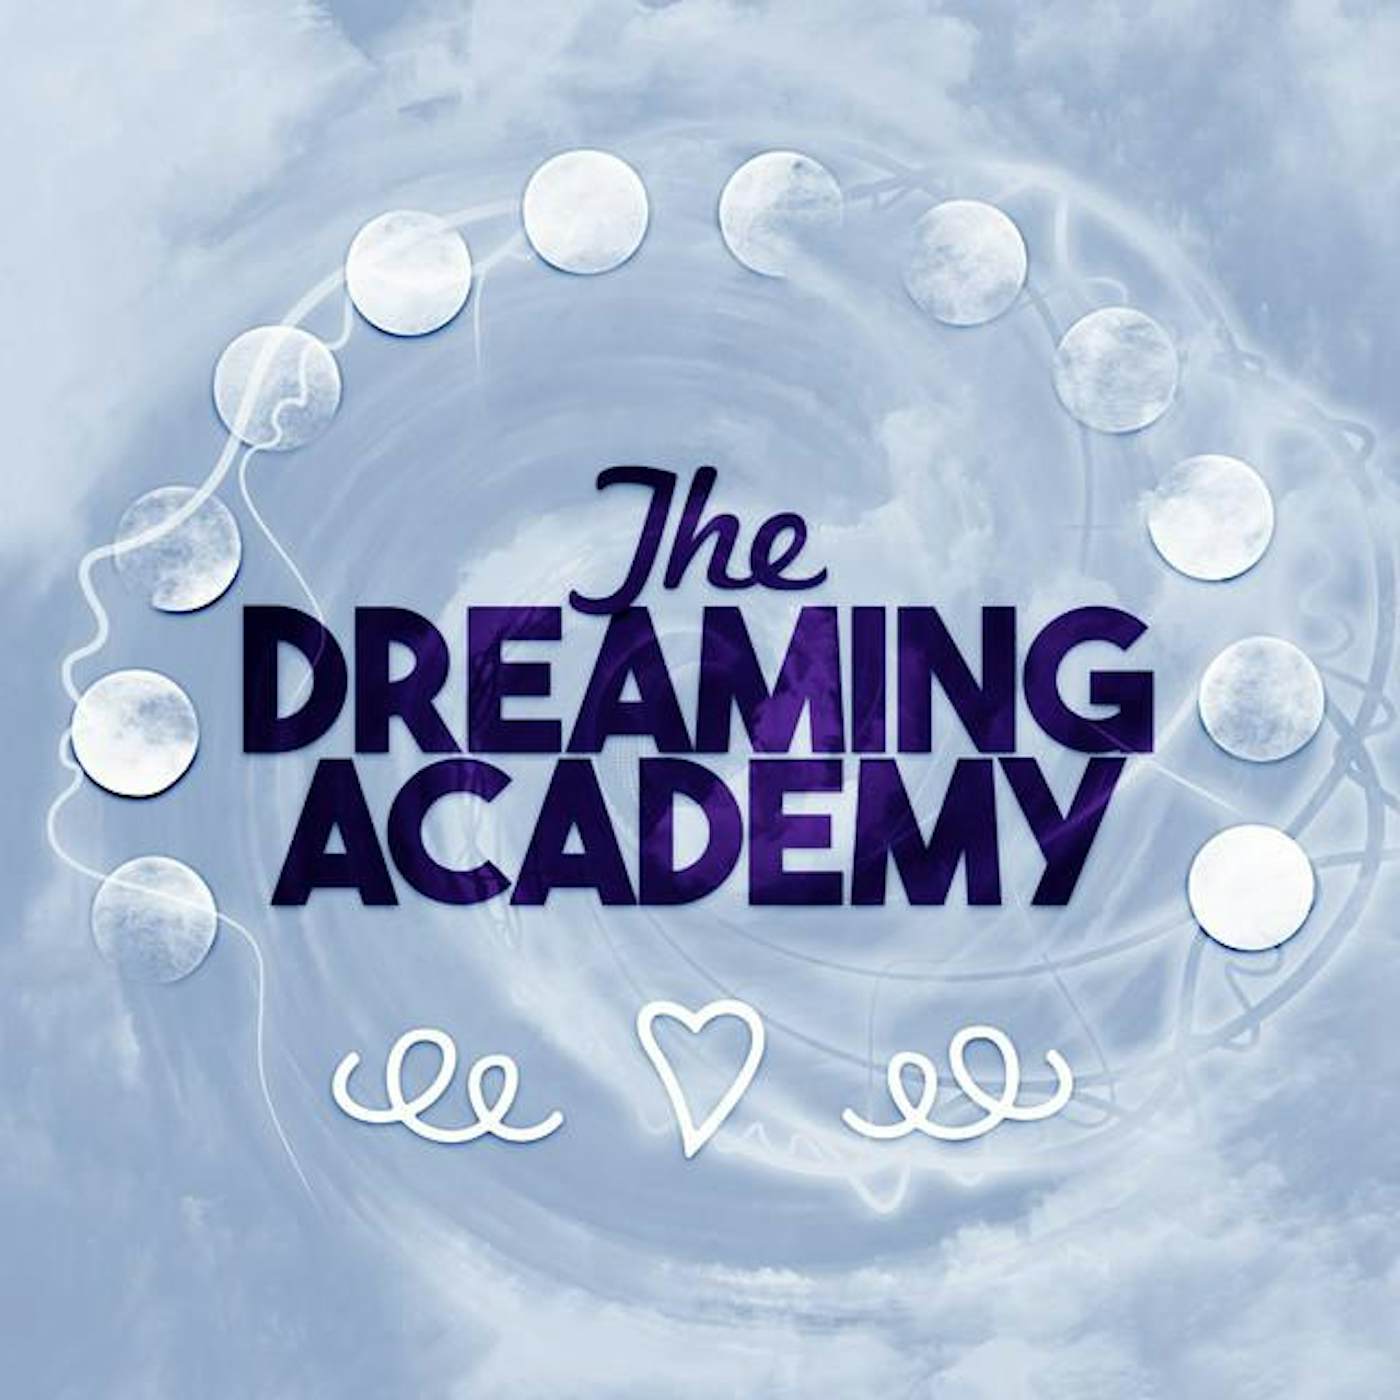 The Dreaming Academy